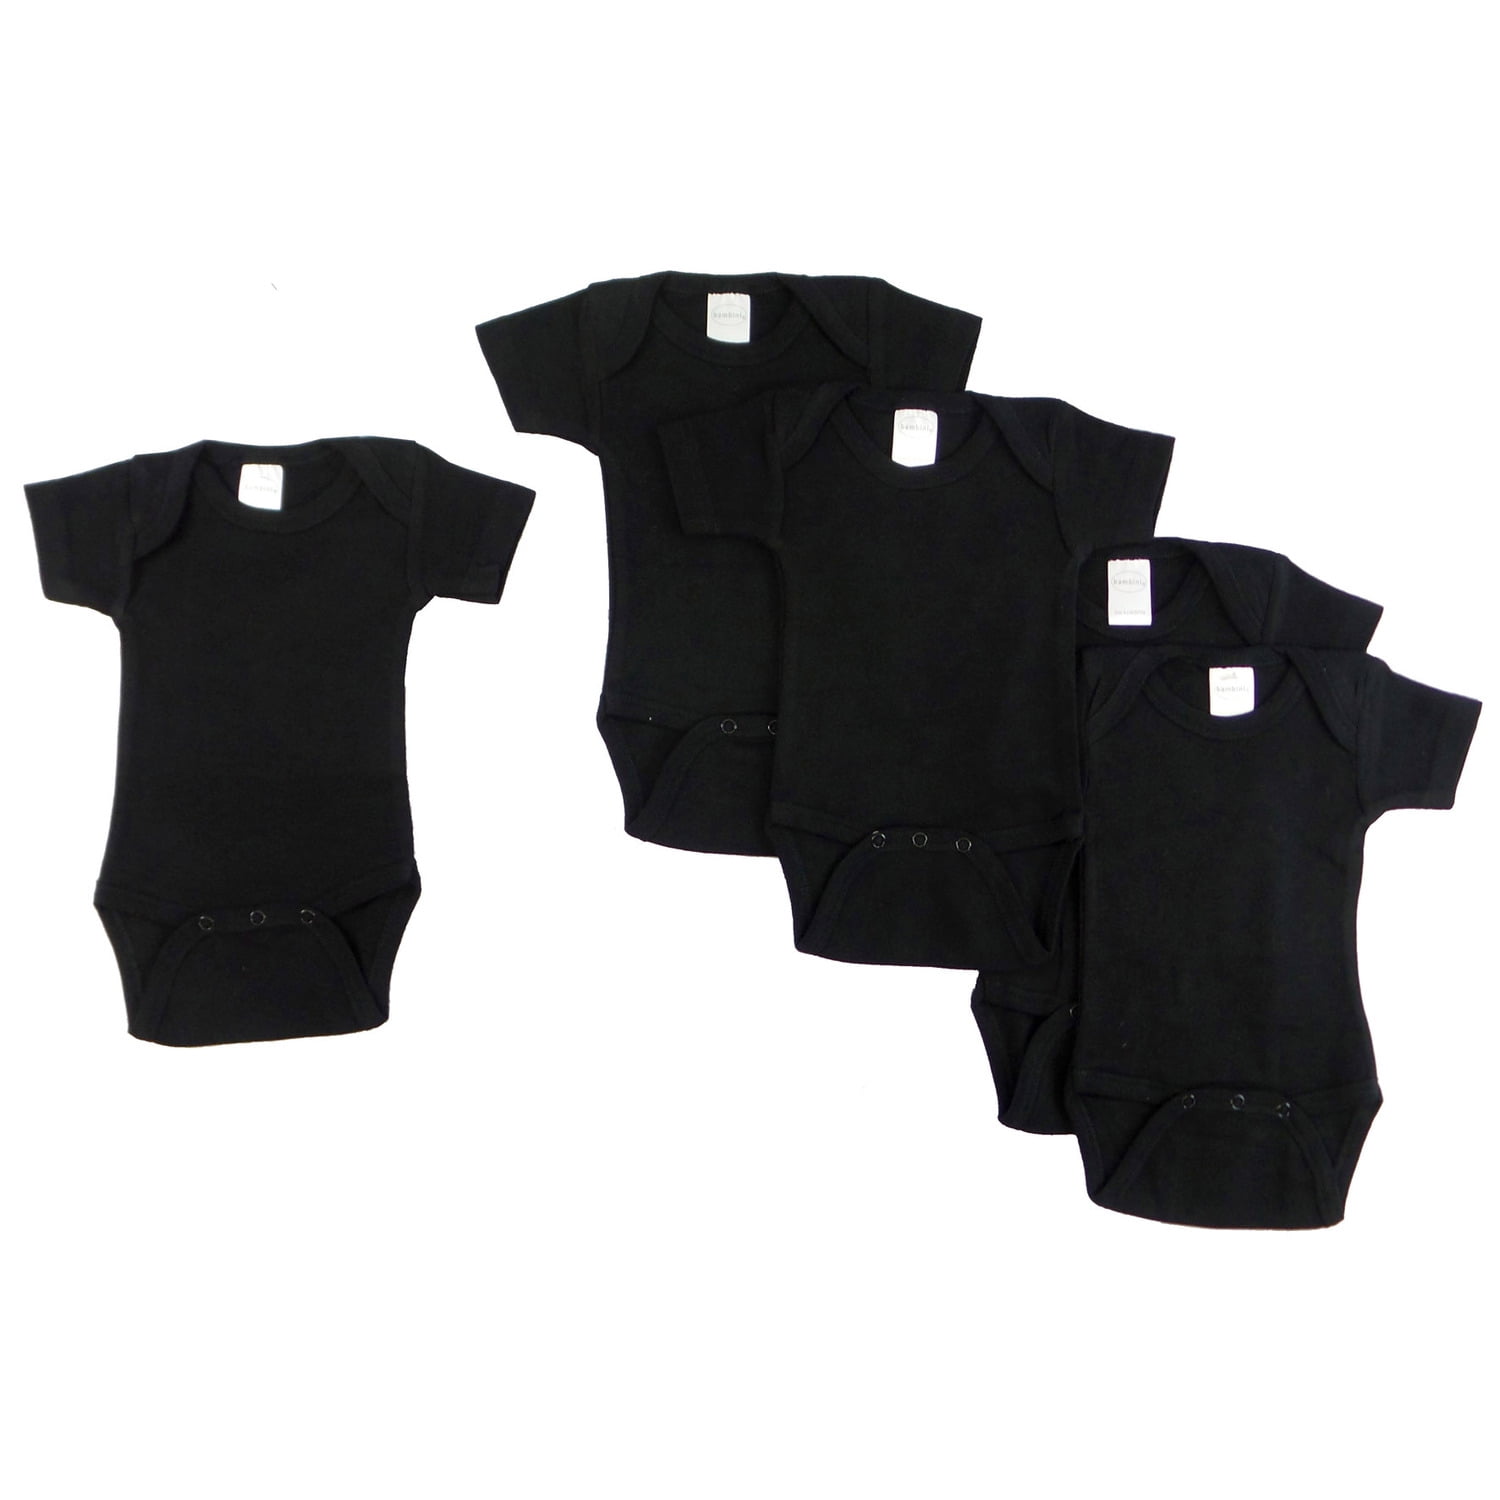 0010bl5-s Short Sleeve - Black, Small - Pack Of 5